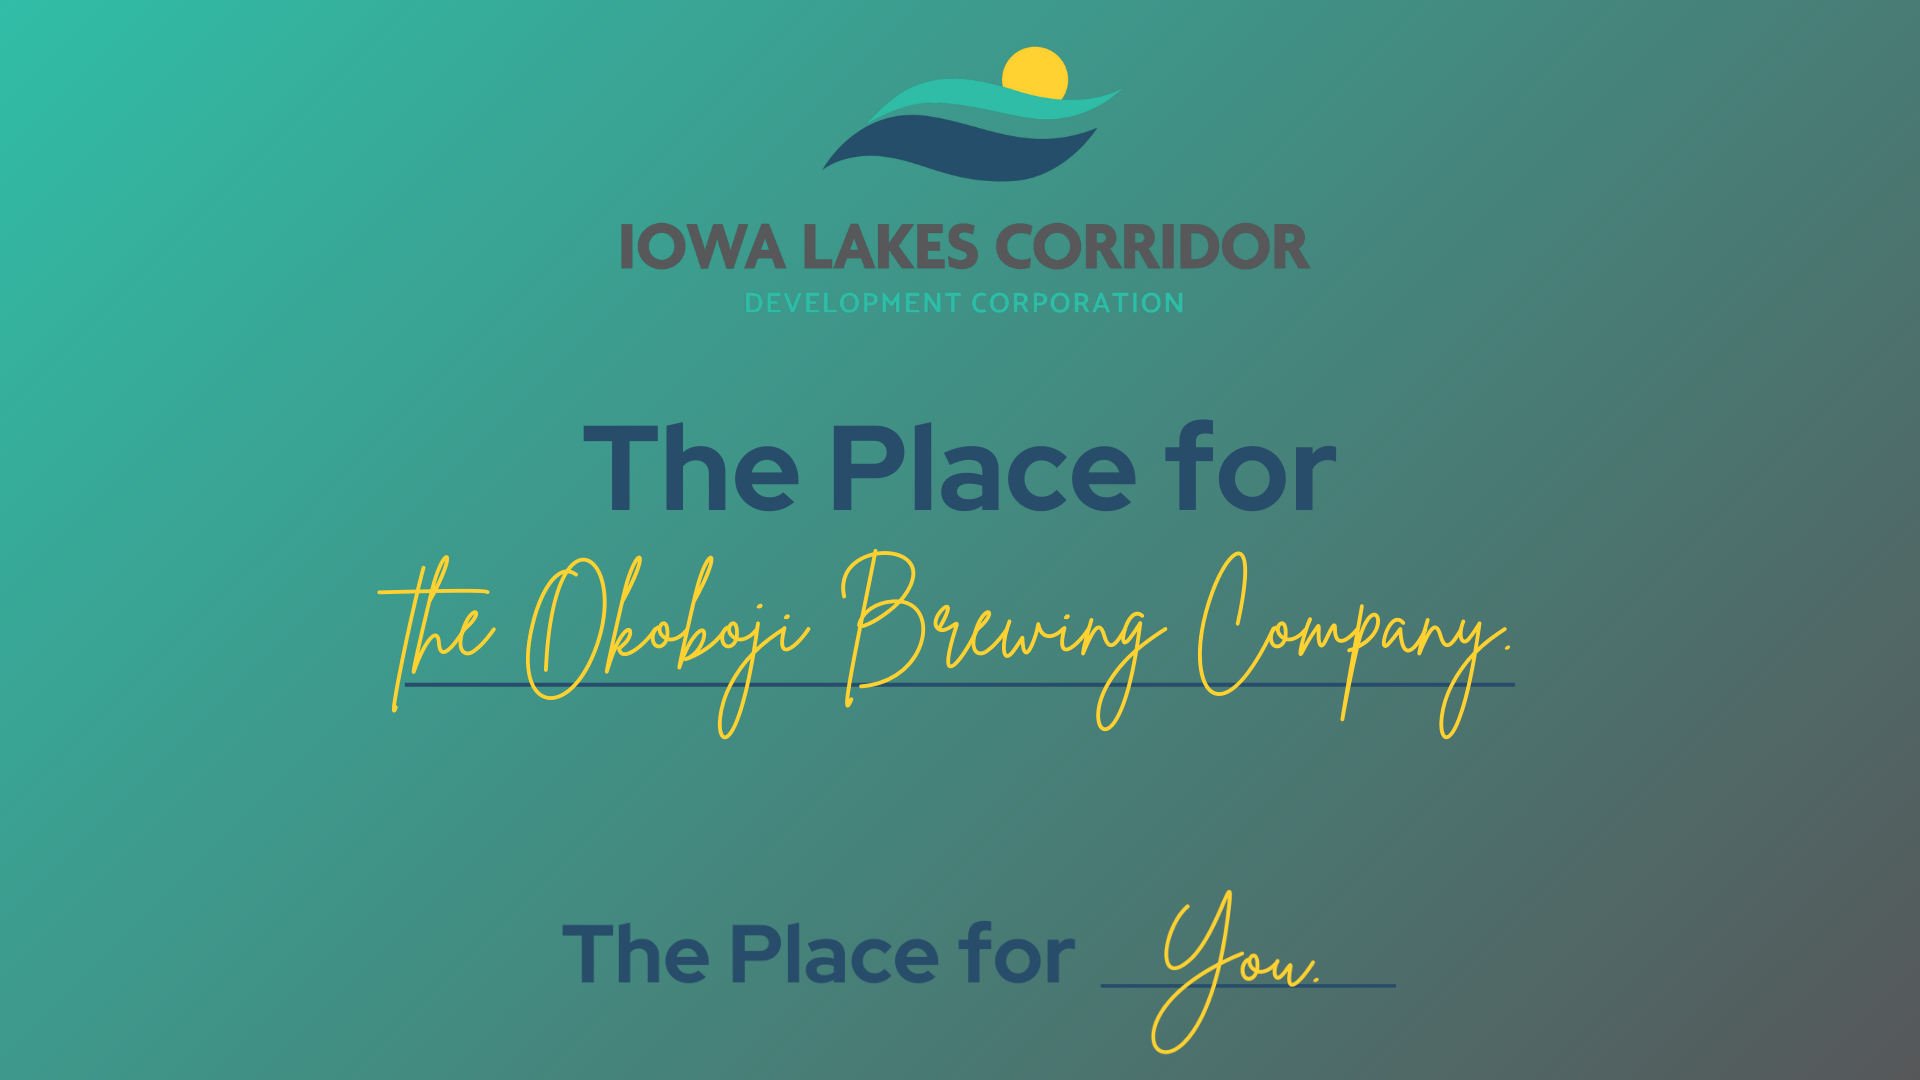 Thumbnail for The Place For...Okoboji Brewing Co.